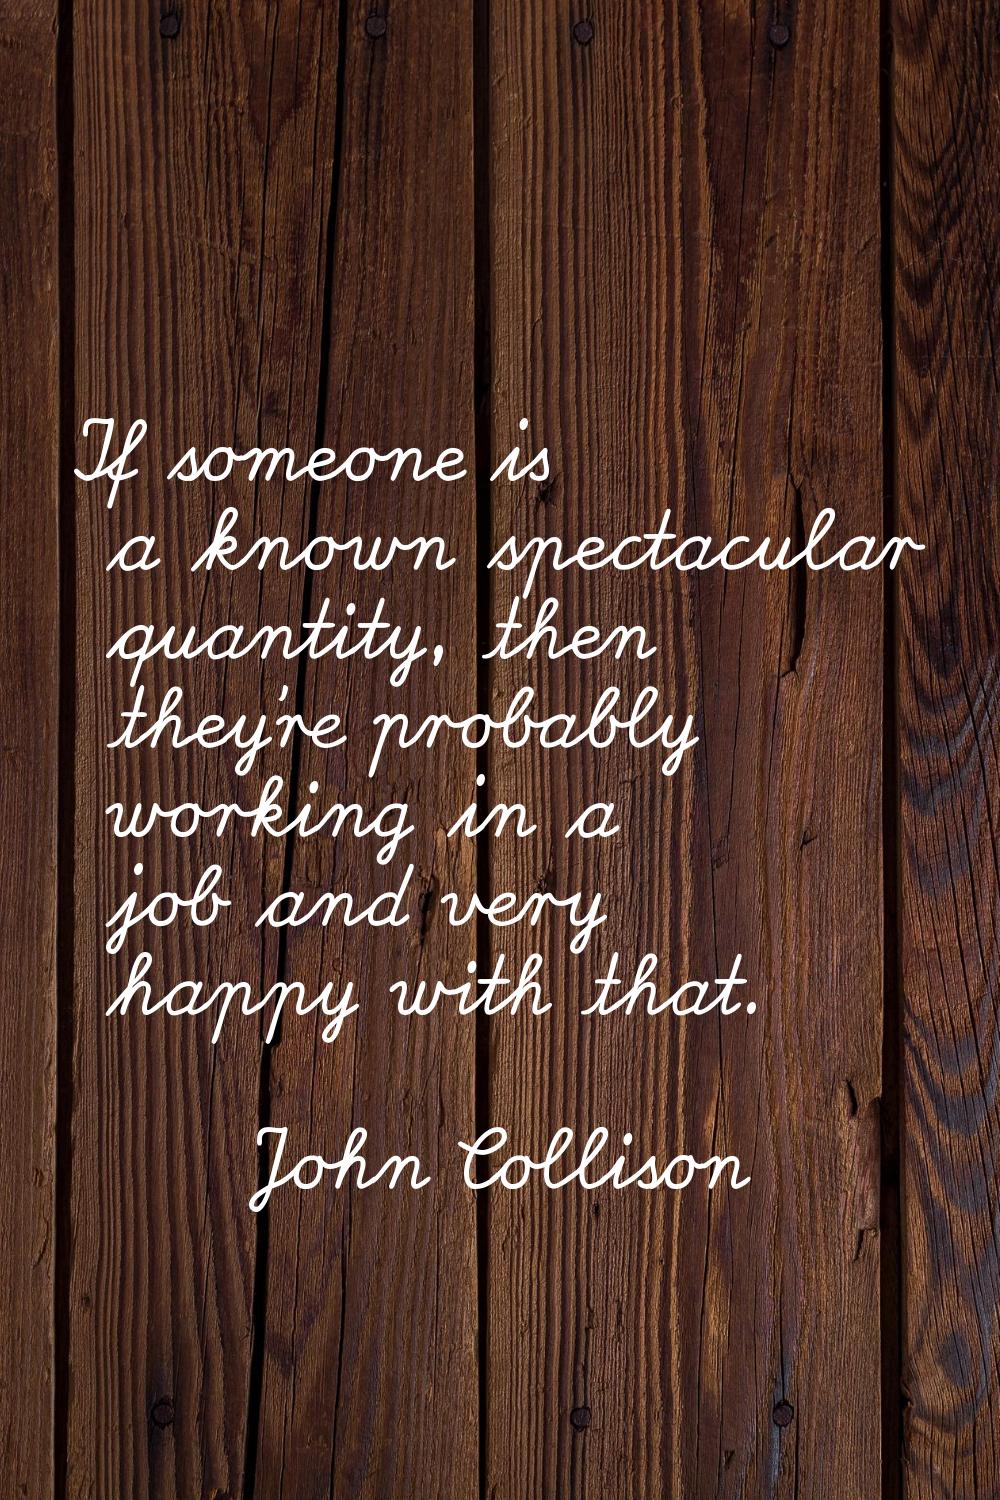 If someone is a known spectacular quantity, then they're probably working in a job and very happy w